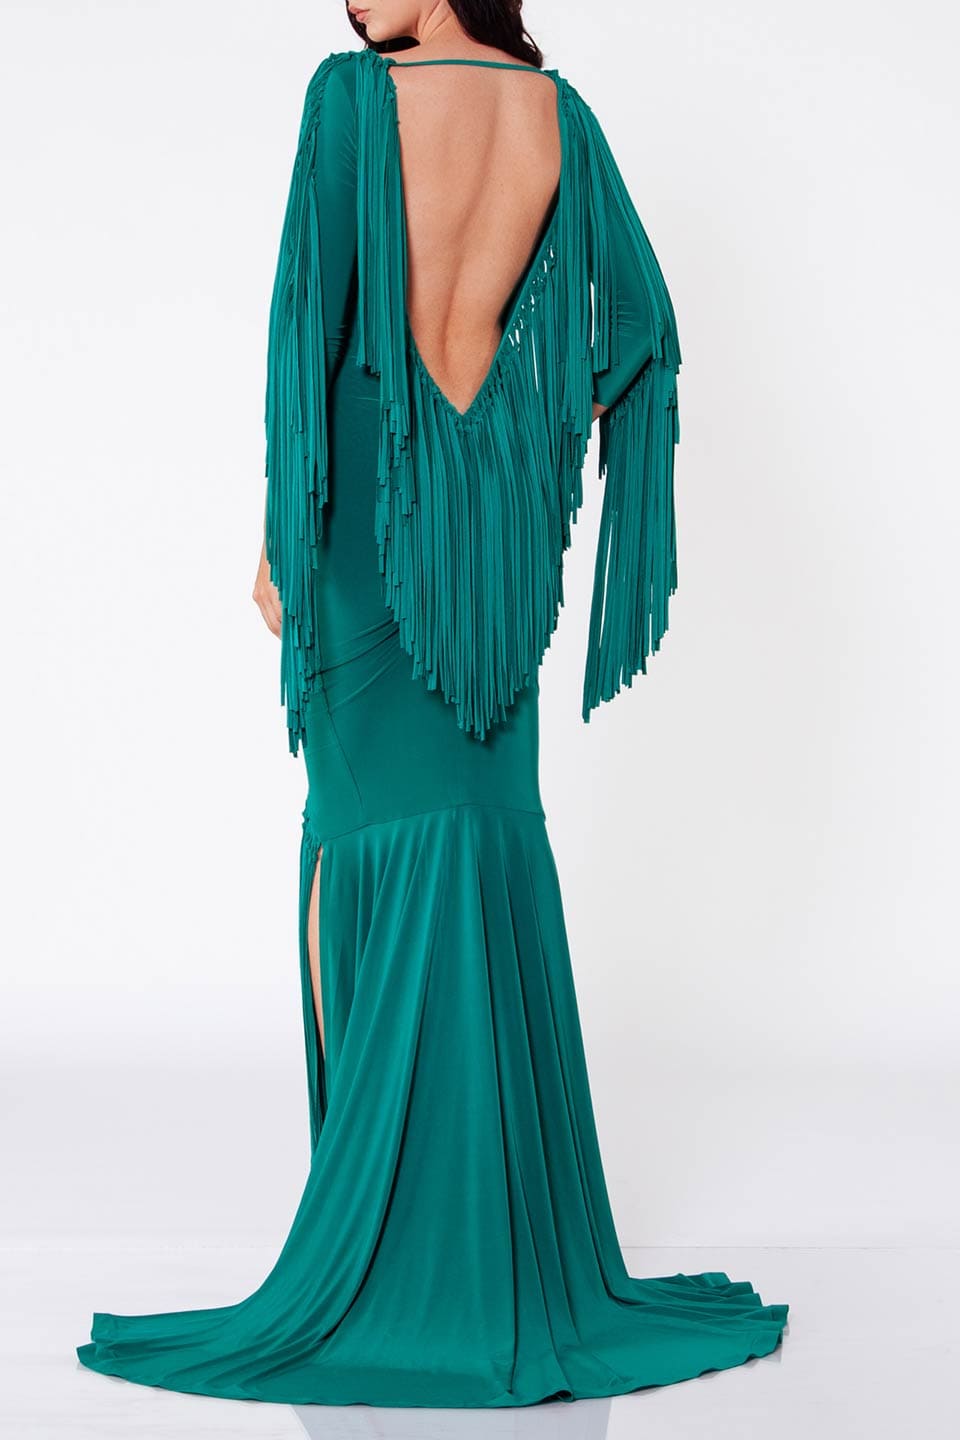 Designer Green Maxi dresses, shop online with free delivery in UAE. Product gallery 2